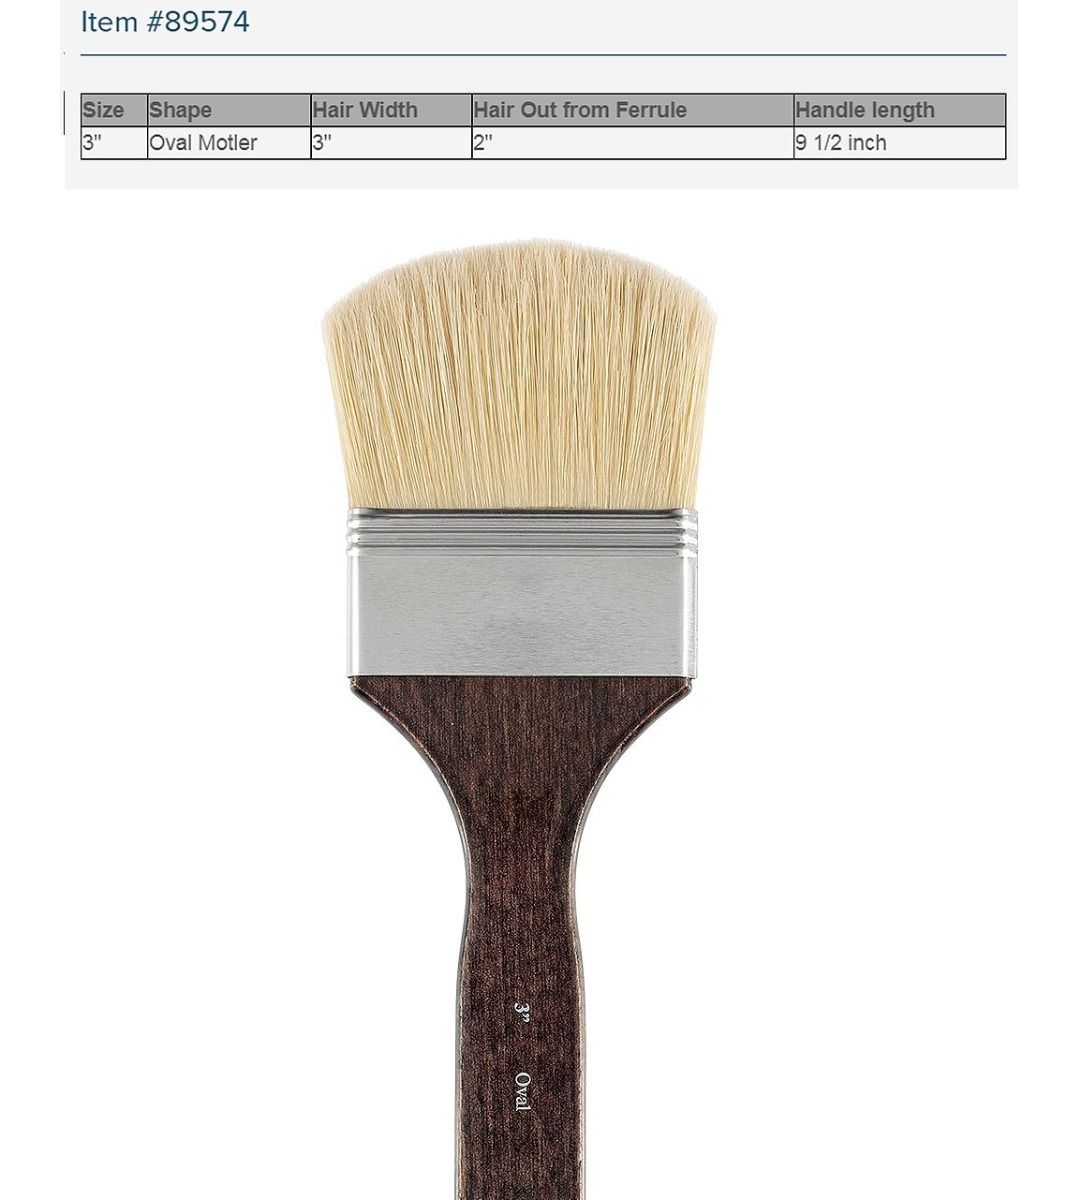 New York Central Gigante Bristle Brushes - Large Scale Painting Brushes